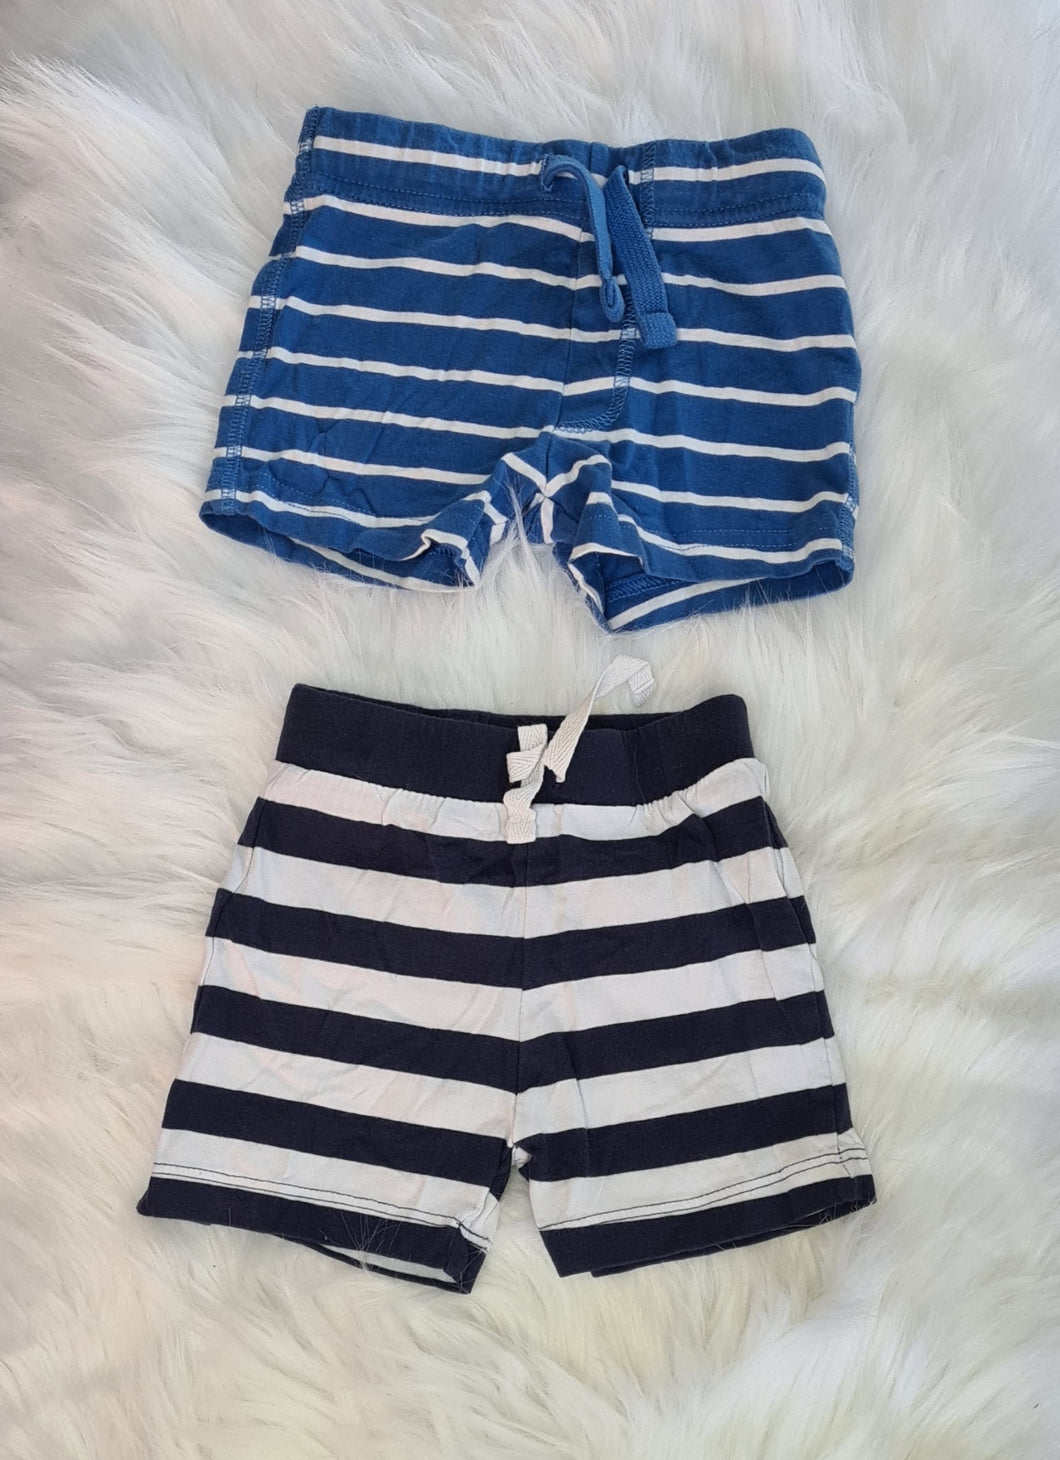 Boys 3-6 Months - 2 Piece Set of Shorts - Blue and Black Striped